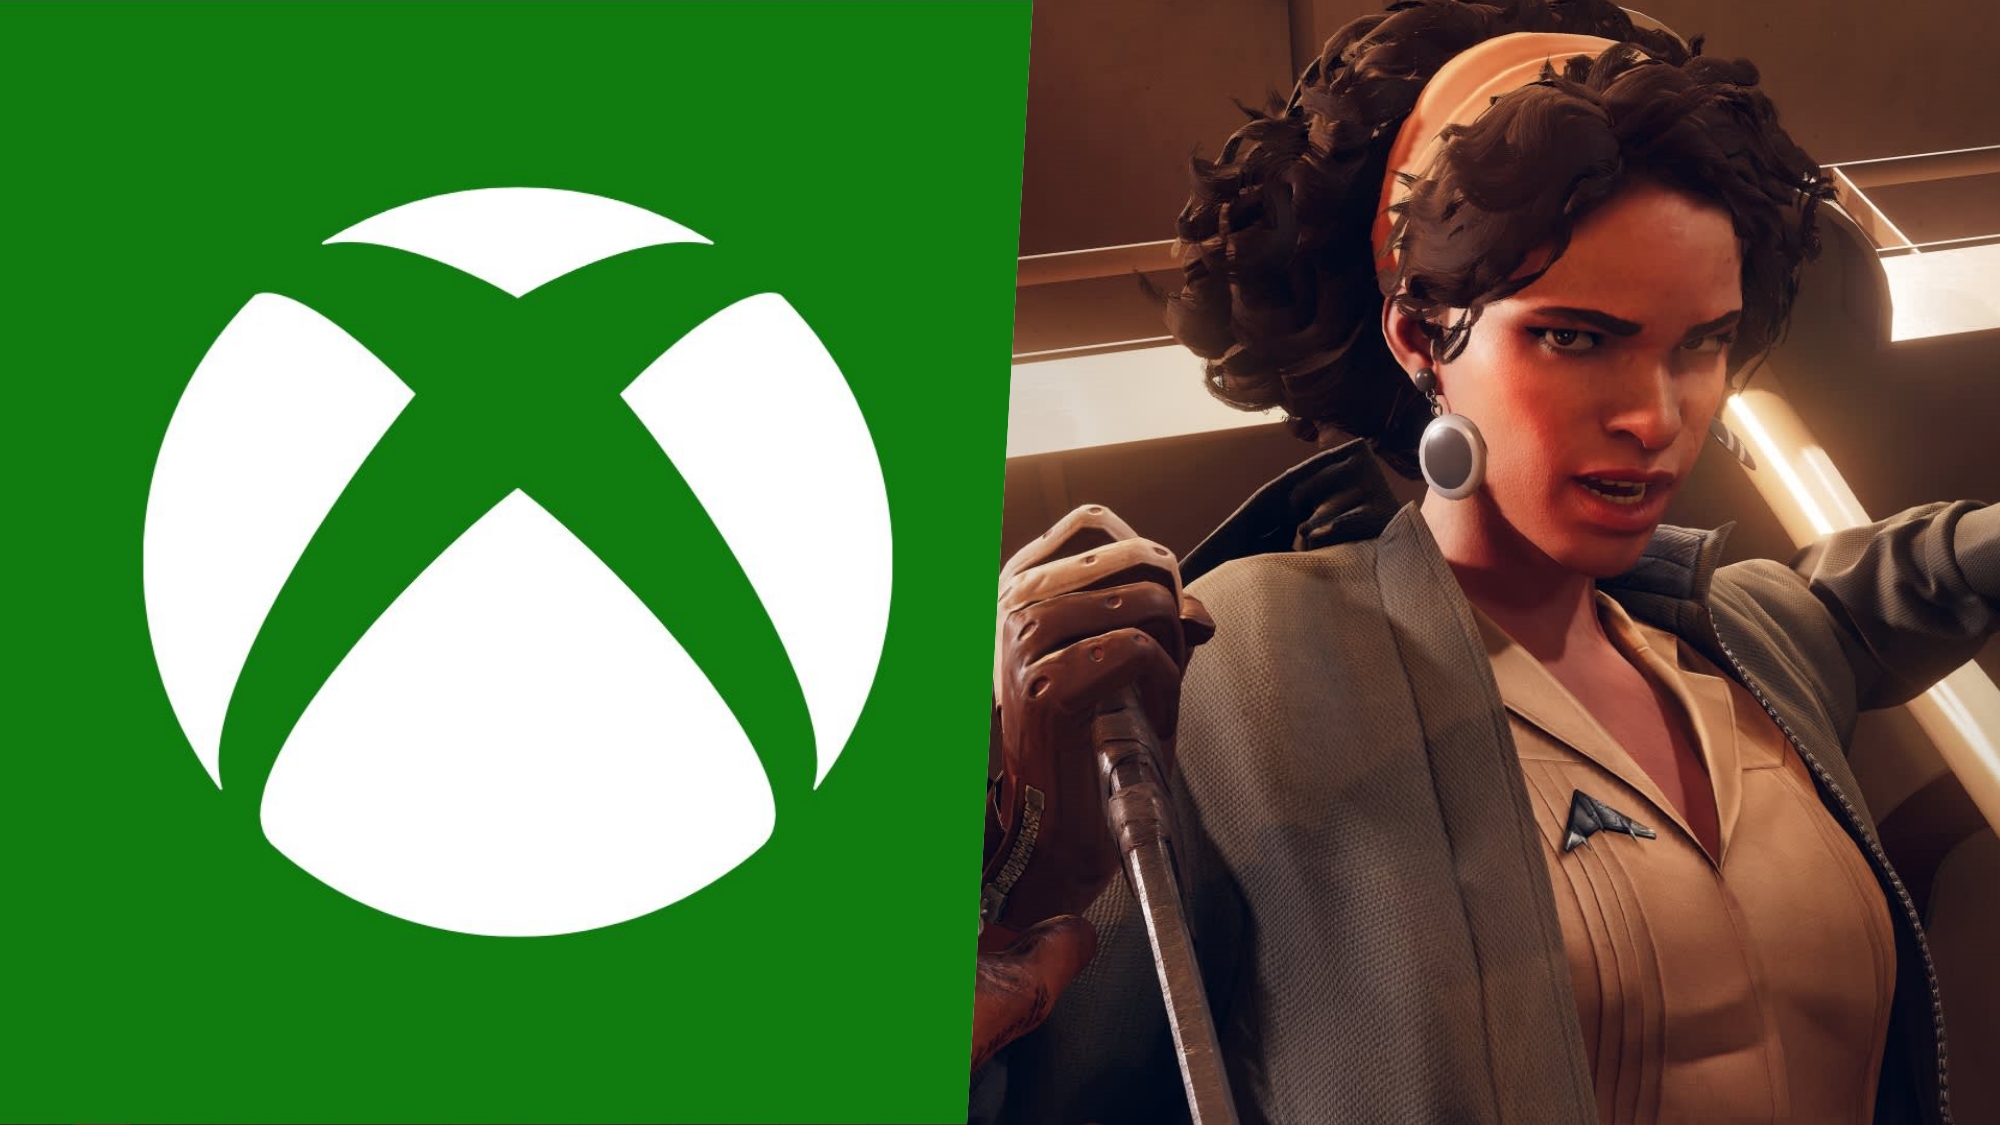 Xbox is hiking Game Pass prices but sparing PC Game Pass, at least for now